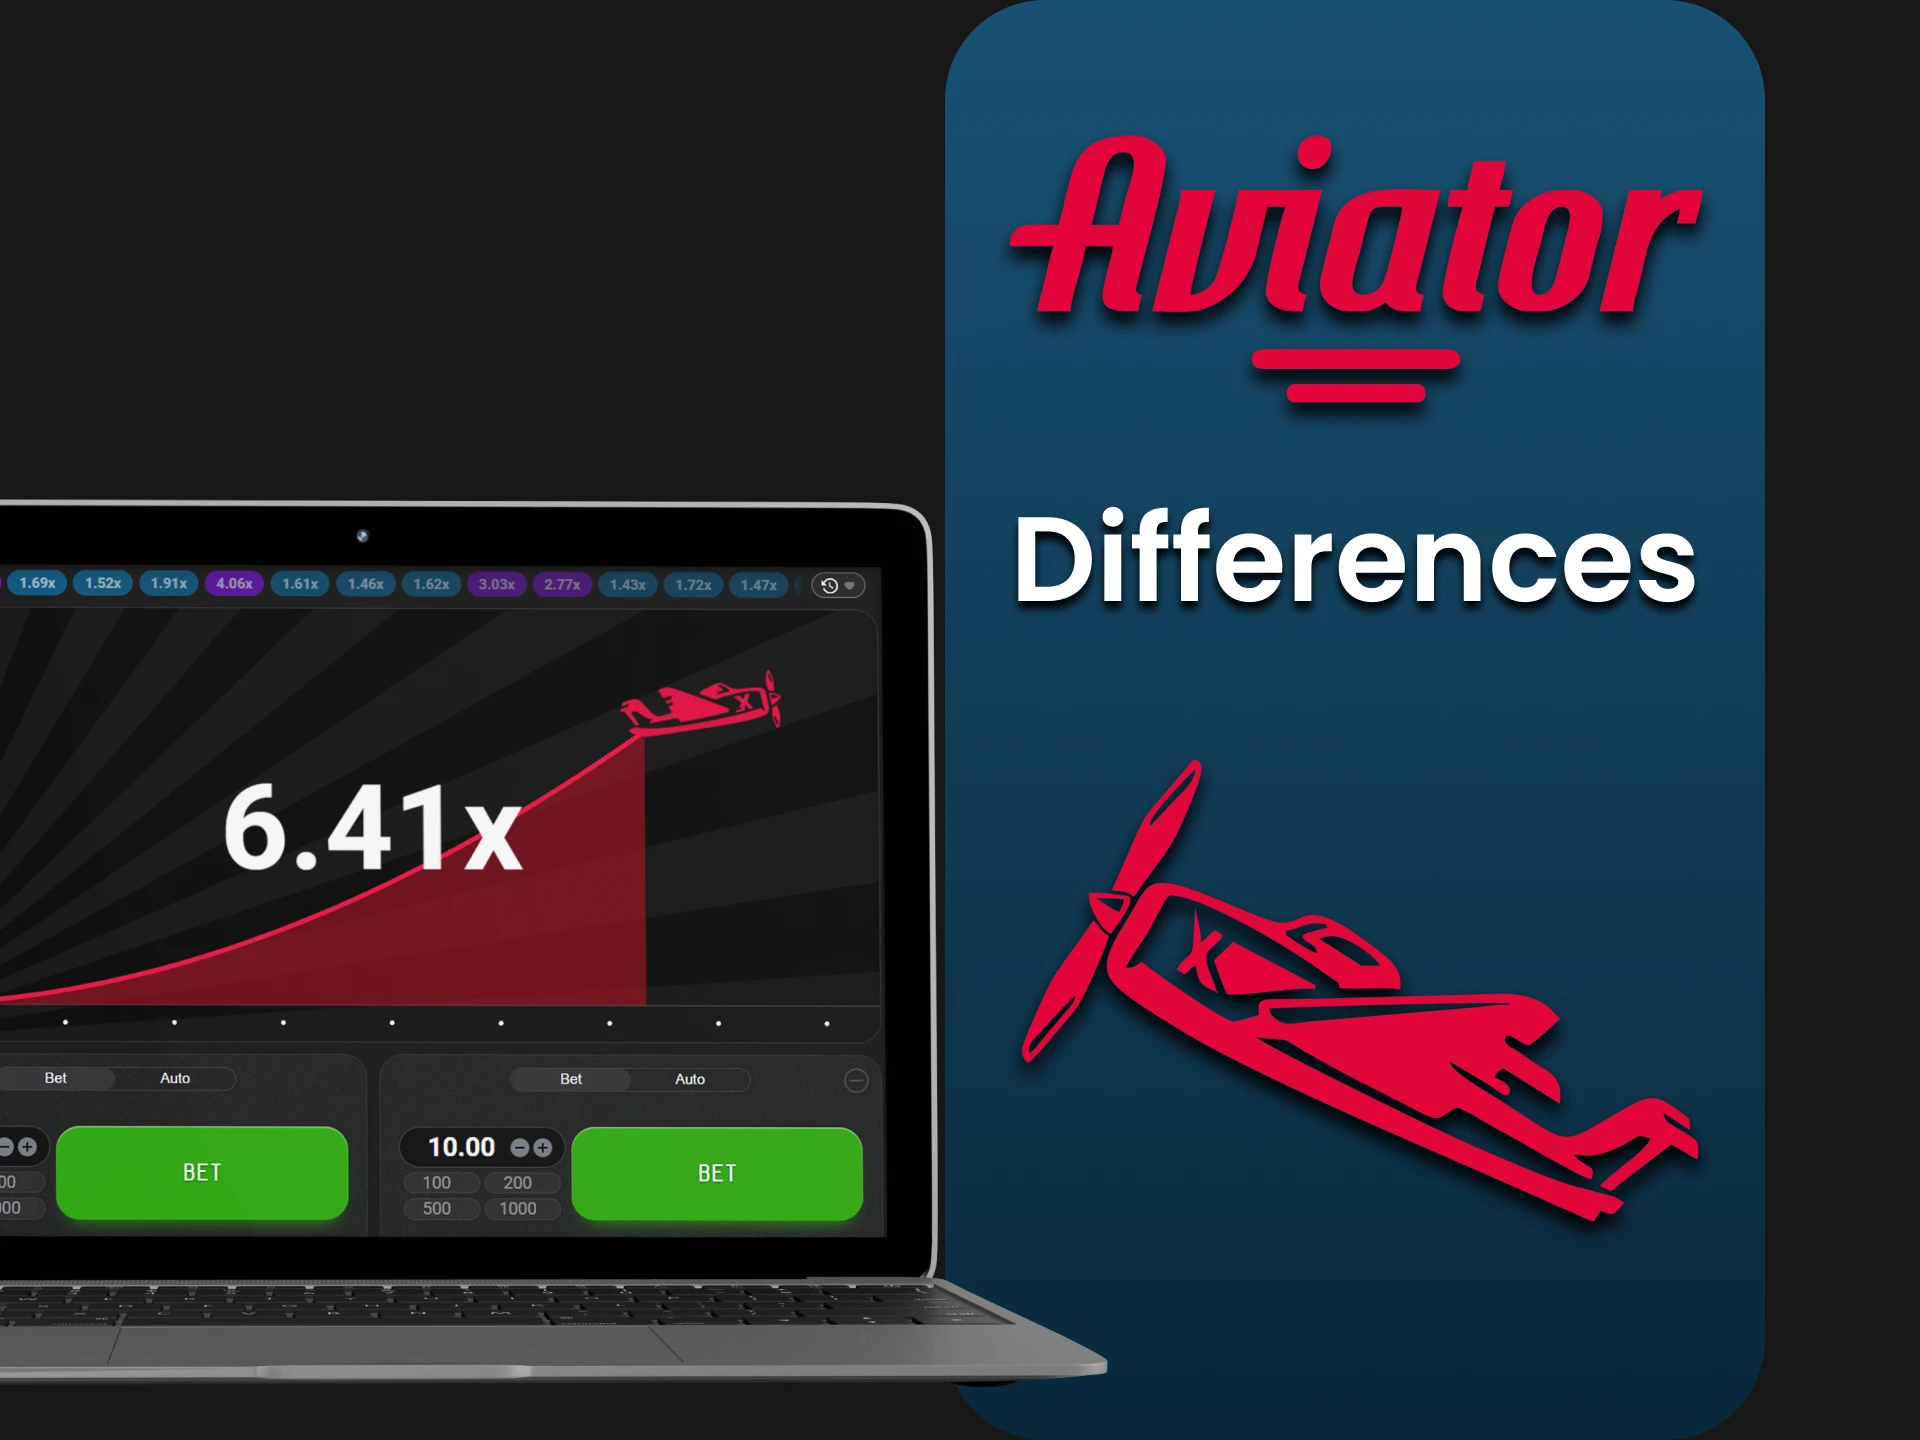 We will tell you about the differences between the paid and free Aviator games.